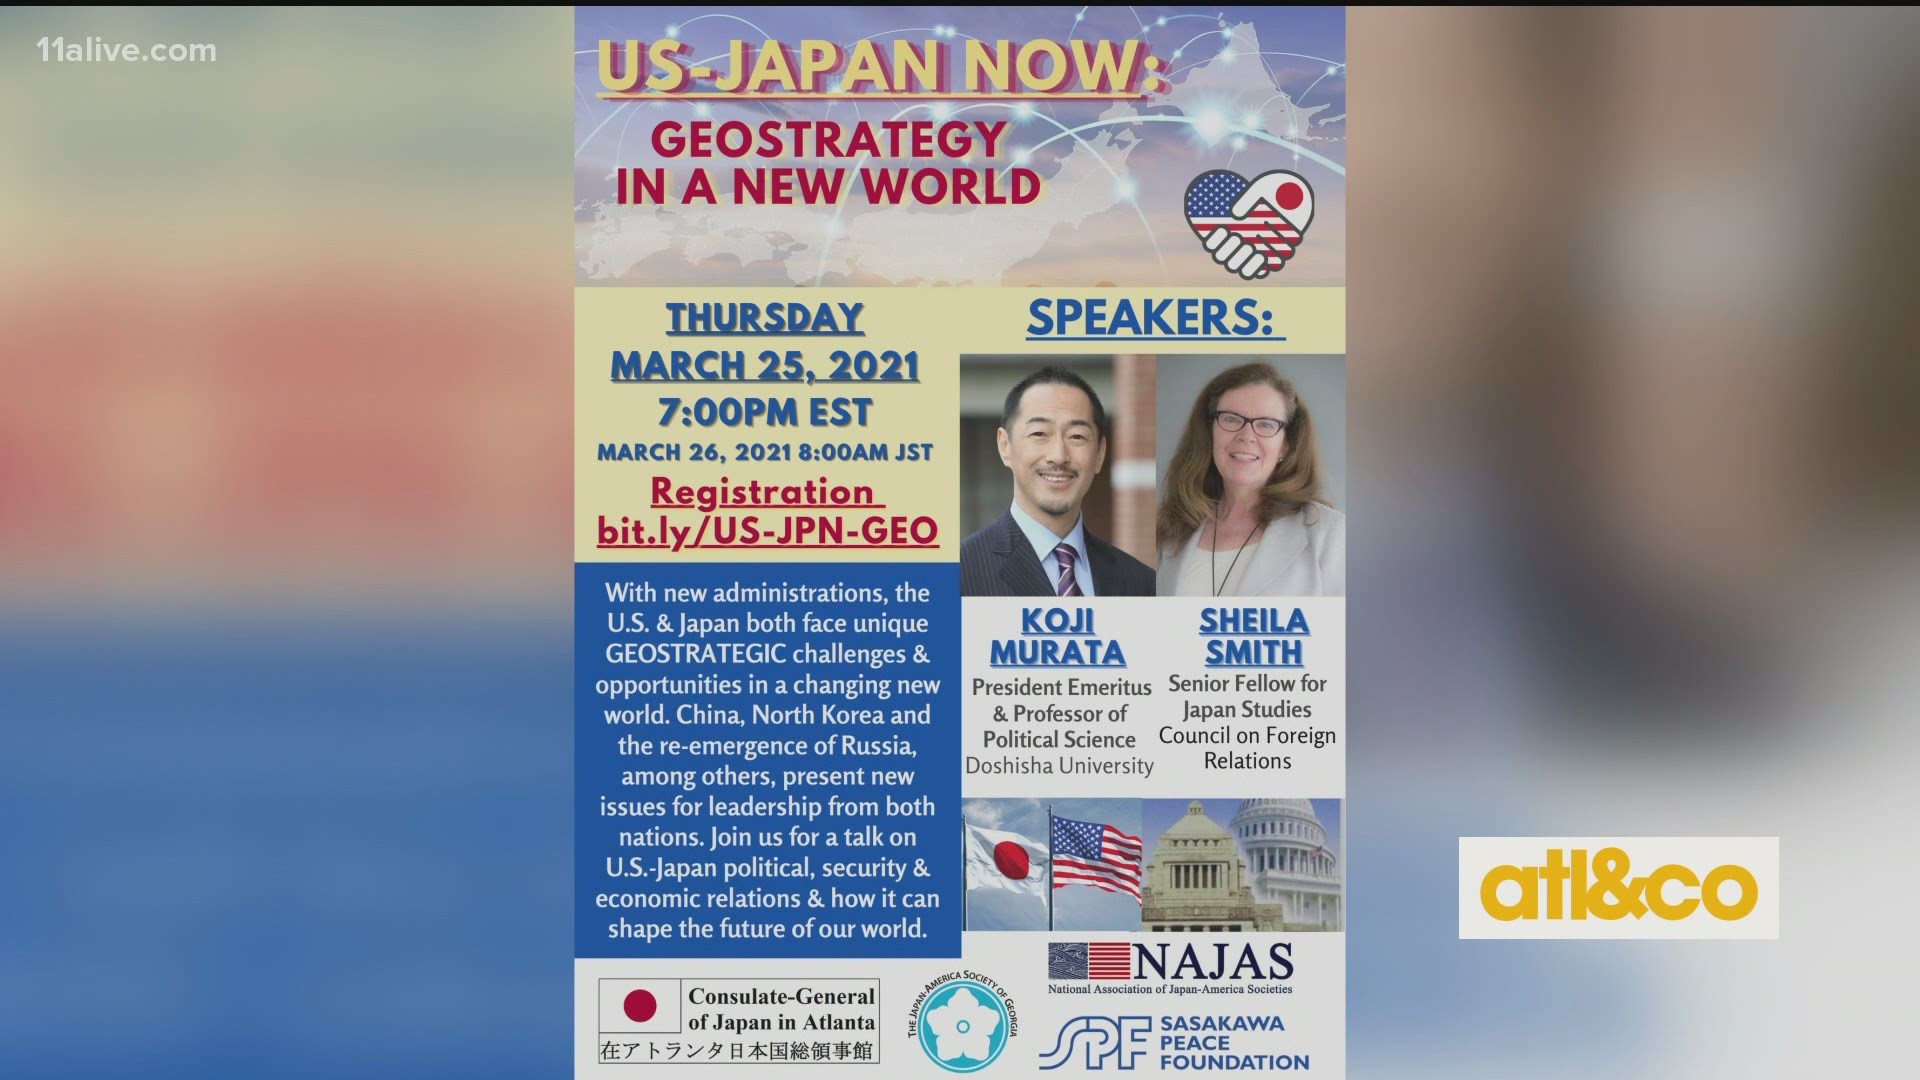 The Japan-America Society of Georgia's vision is to make GA the most desirable place for Japanese and other international visitors to live and work.